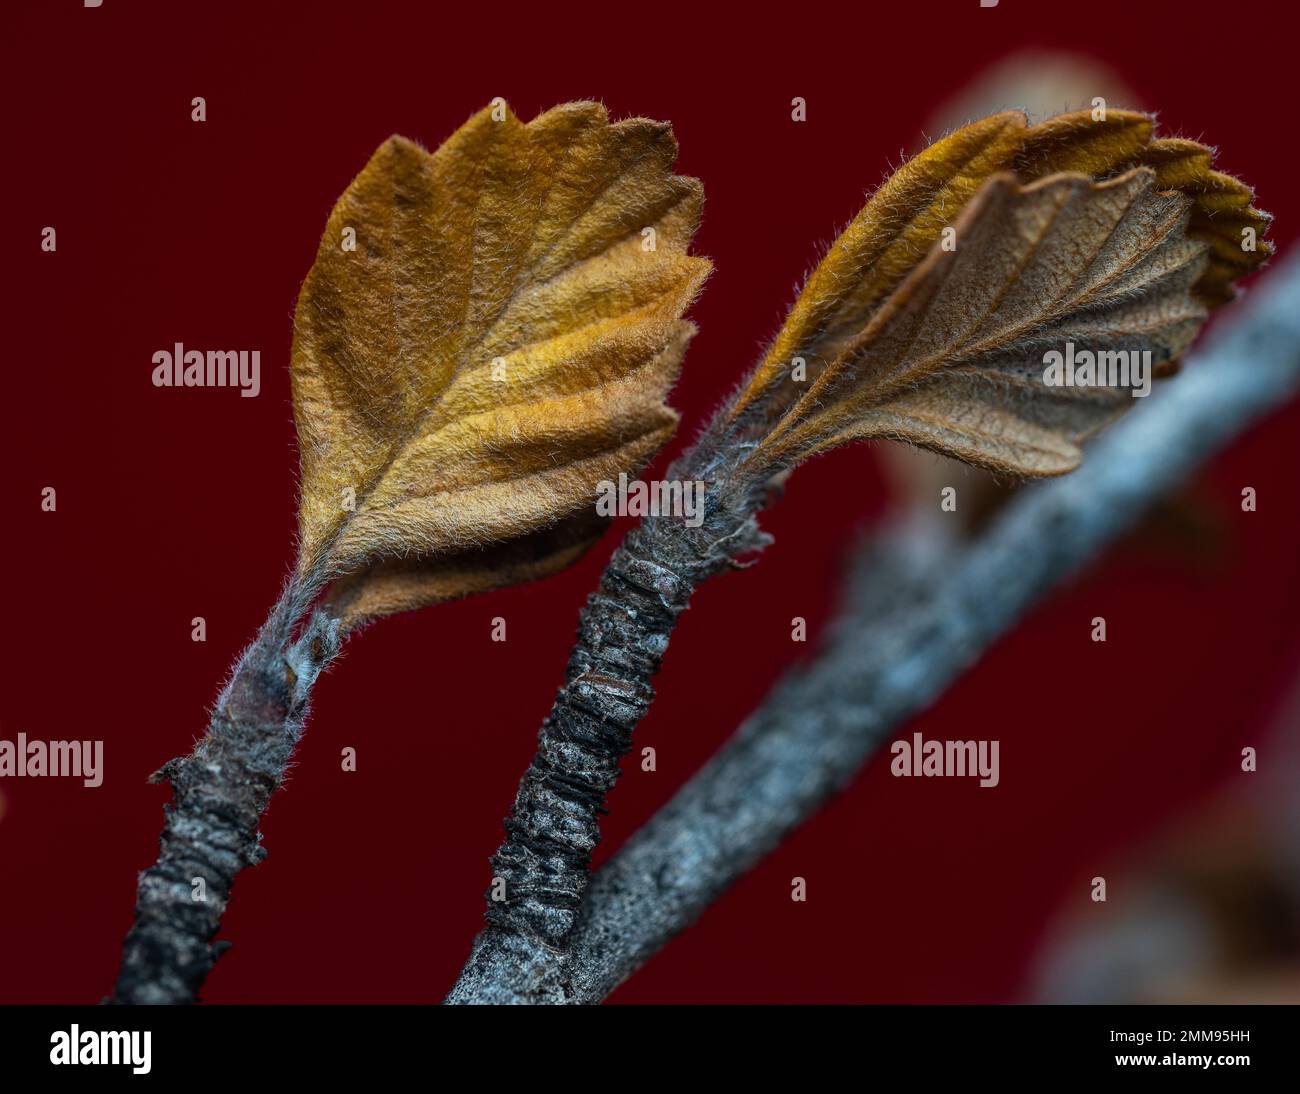 Alderleaf Mountain Mahogany with brown autumn leaves with saw-tooth edges on stems. Stock Photo